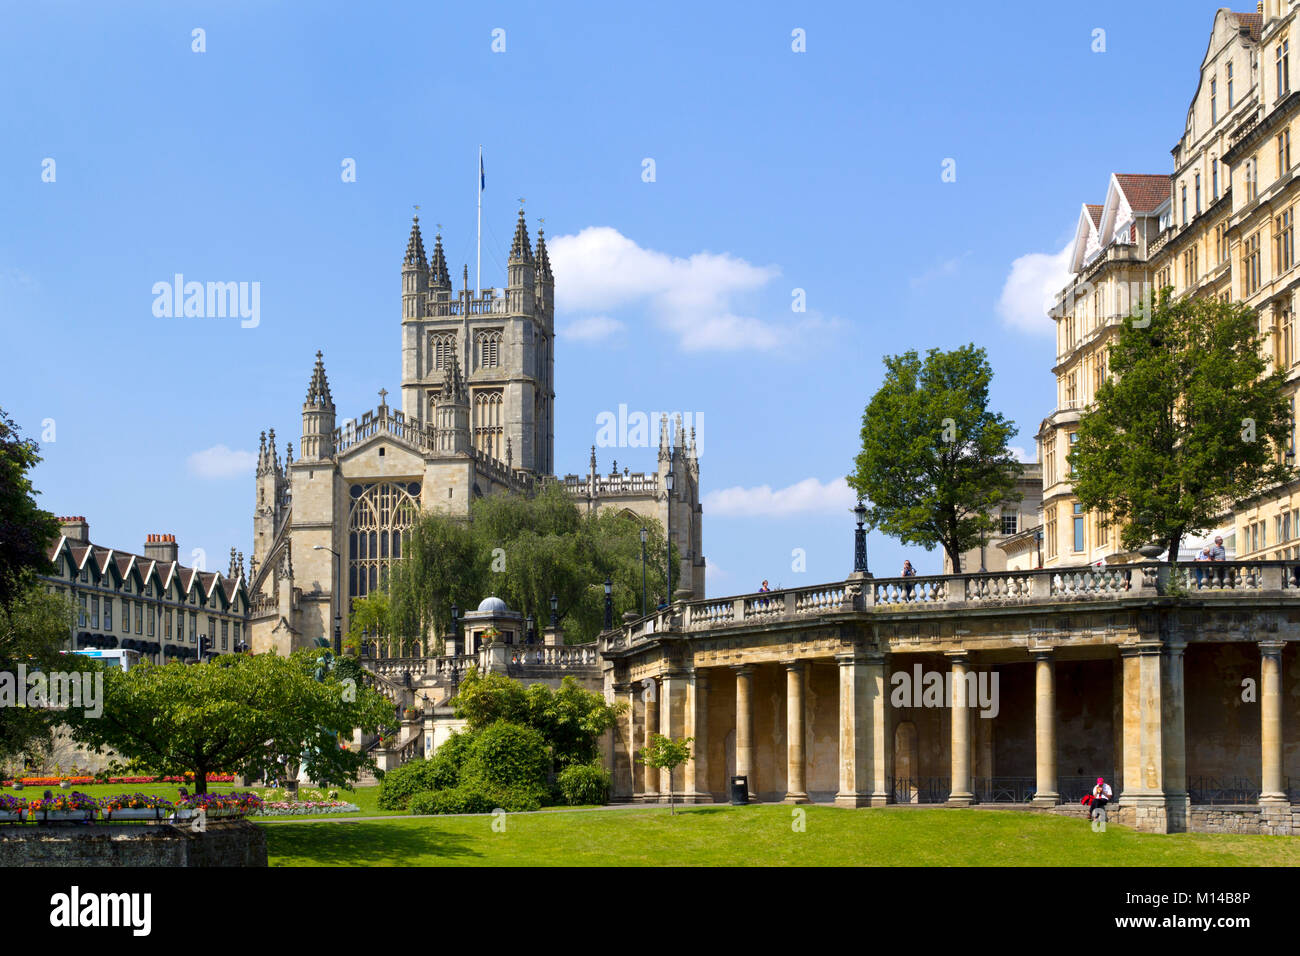 Bath, UK - 3rd July 2011: People relax in a park near historic Bath Abbey in the City of Bath, Somerset, UK. Bath is a UNESCO World Heritage Site famous for it's architecture. Stock Photo